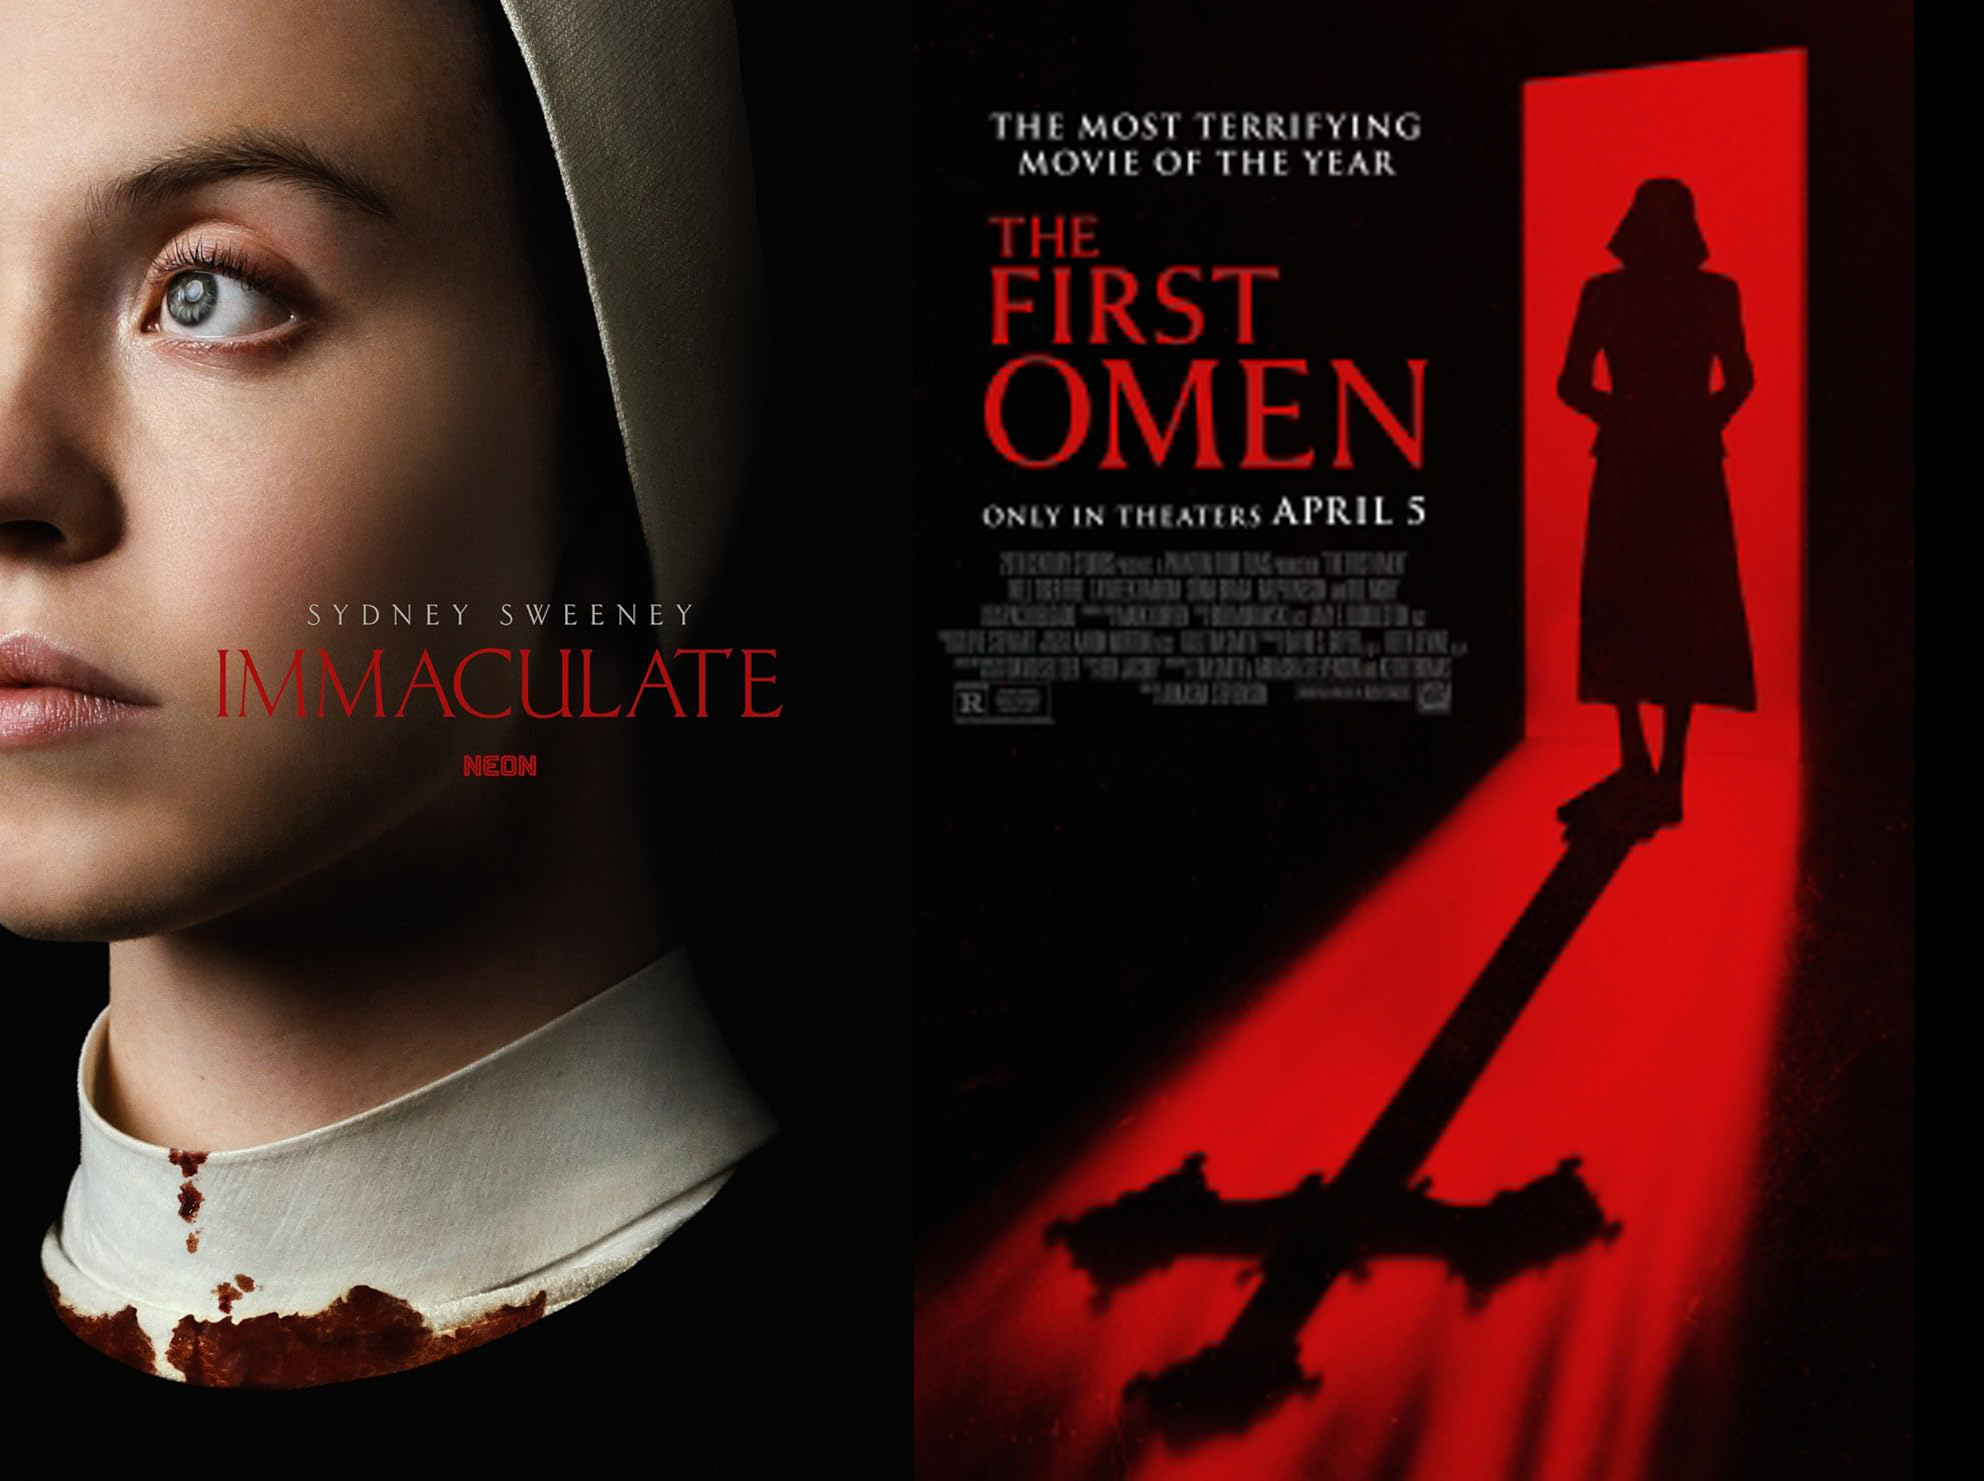 Reviews: Immaculate and The First Omen